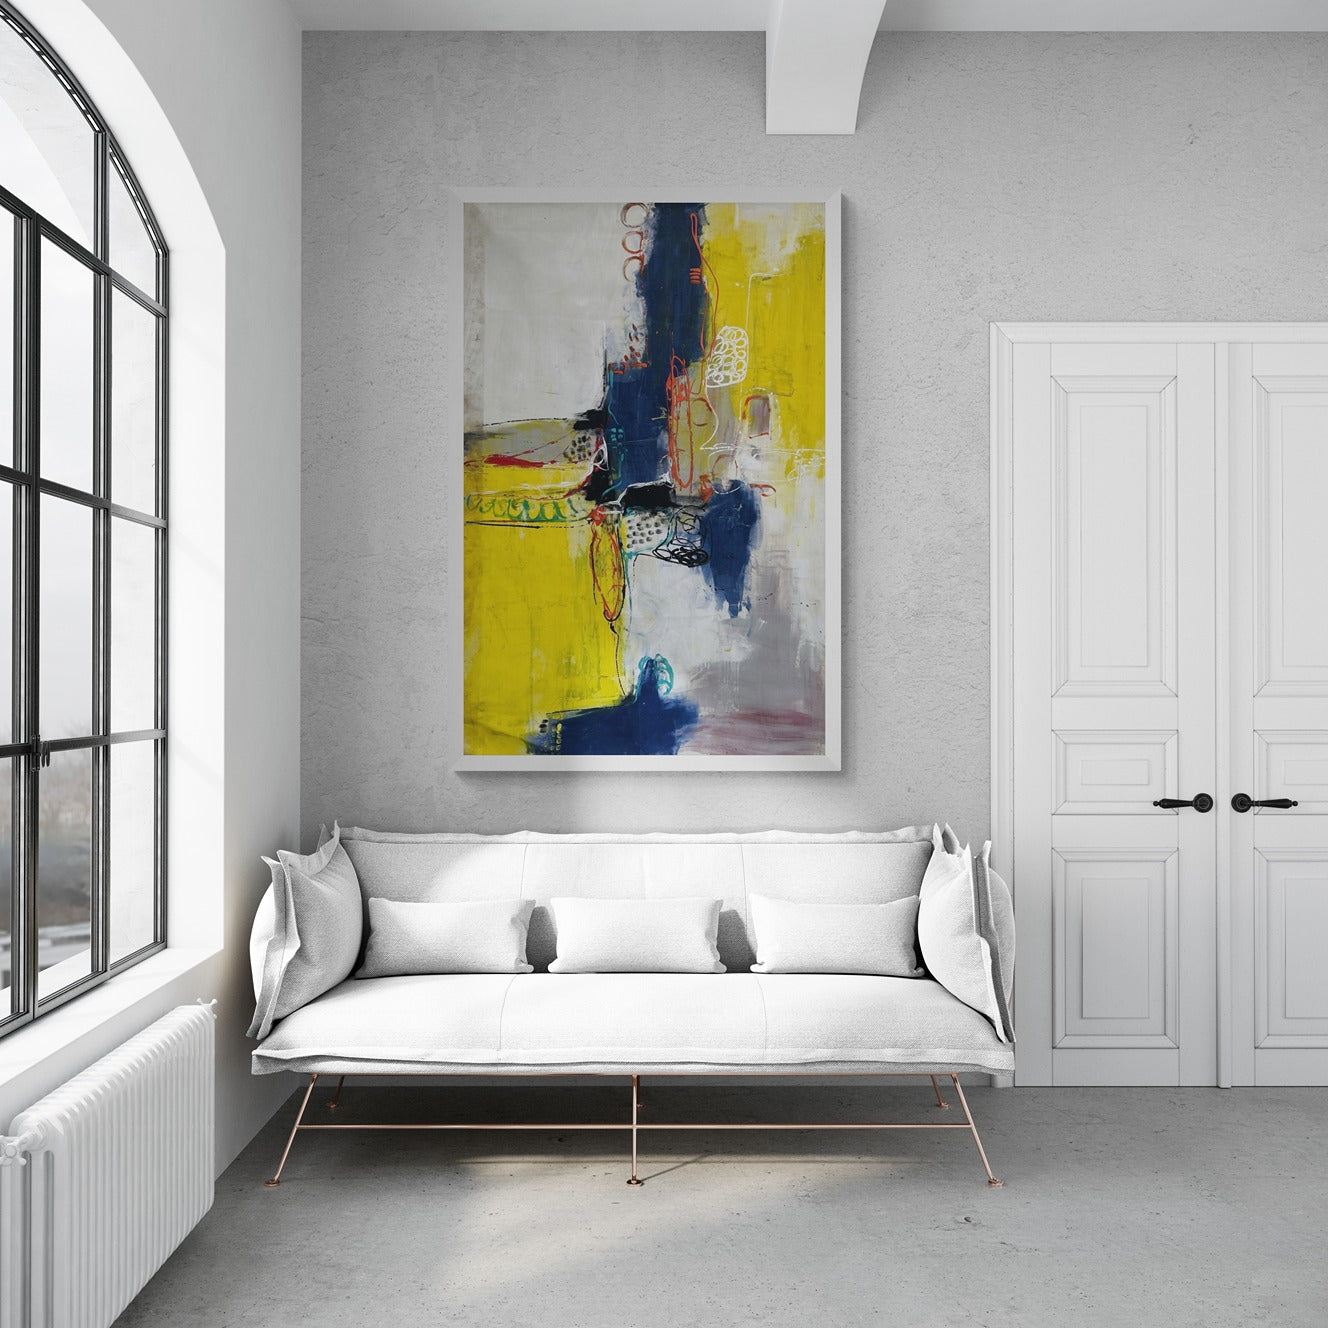 Original hand-painted abstract canvas wall art positioned elegantly above a modern three-seat sofa in a stylish apartment setting